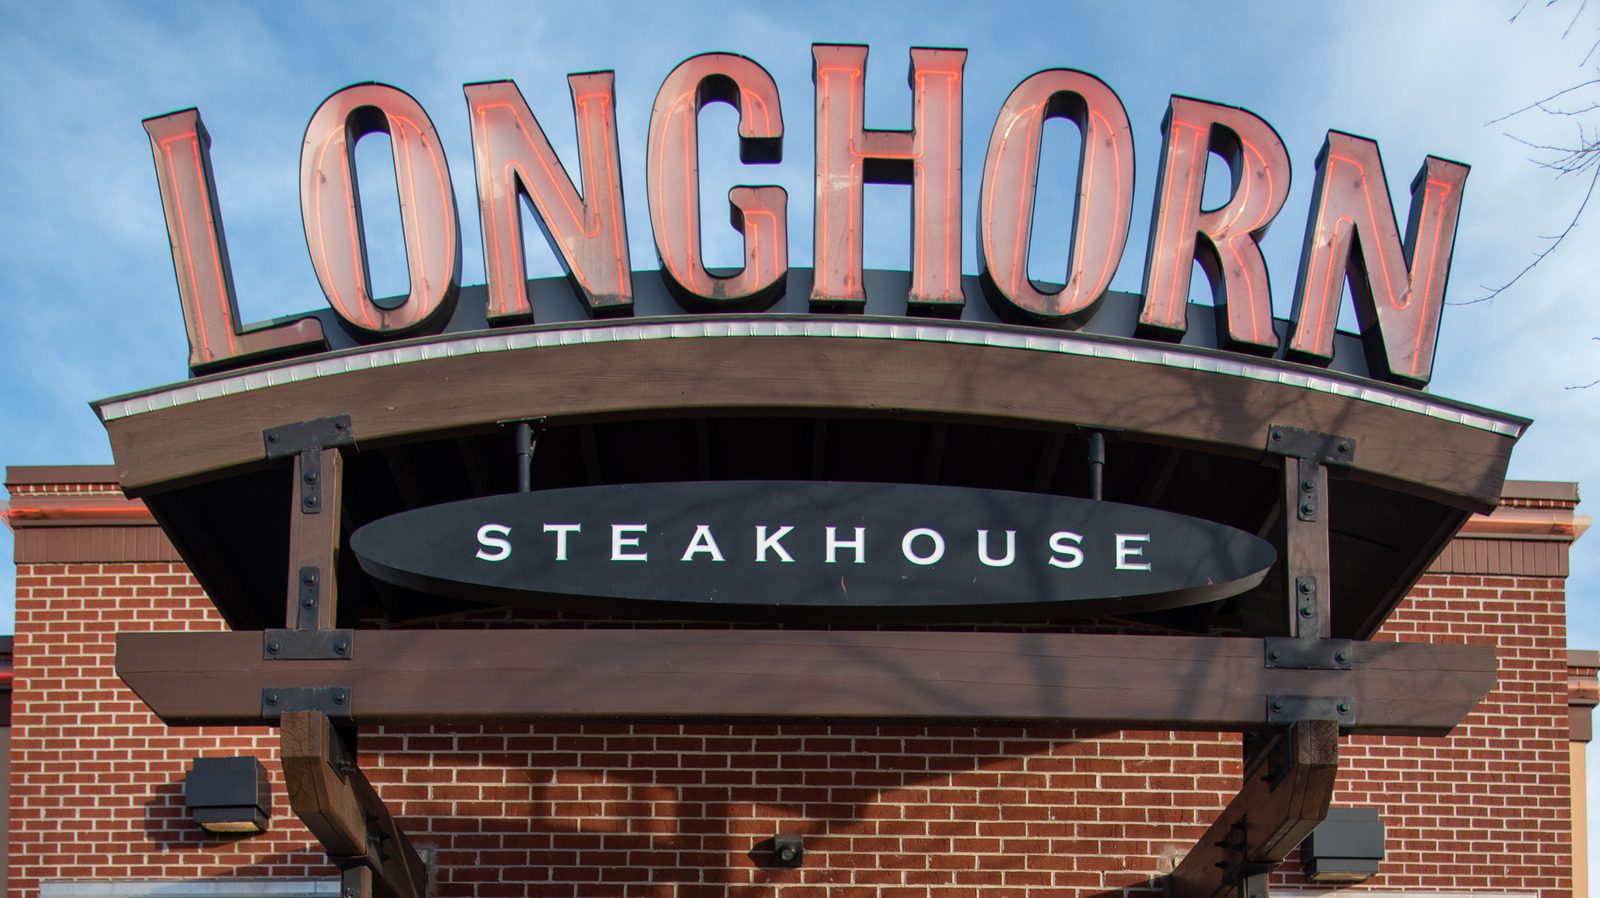 https://www.mashed.com/img/gallery/how-rich-is-the-longhorn-steakhouse-ceo-and-whats-the-average-pay-of-its-employees/l-intro-1618602434.jpg